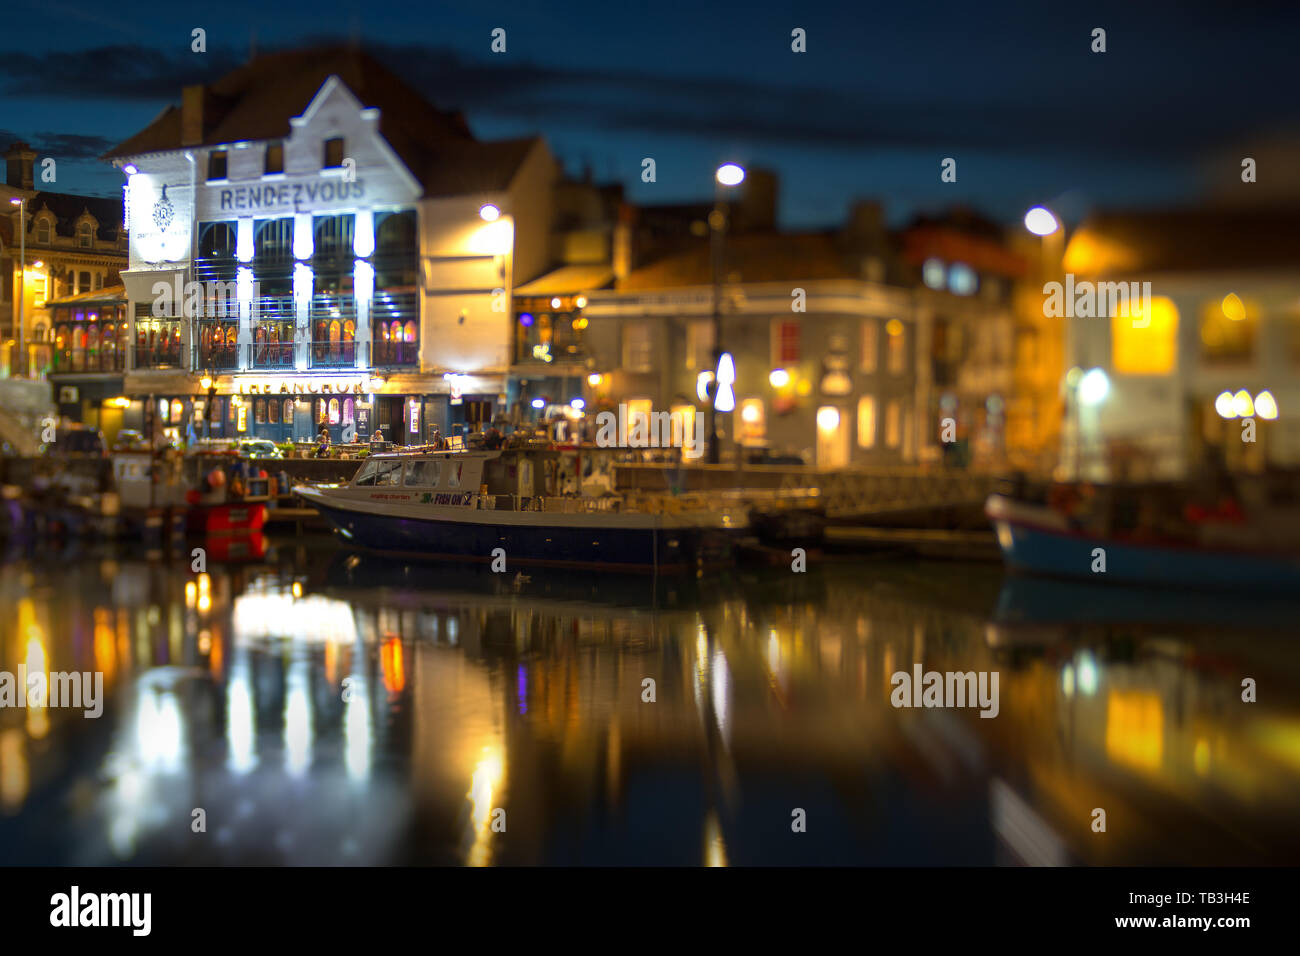 A shot taken at night with a Lensbaby Lens of the Rendevous Nightclub and Harbourside next to the Town Bridge in Weymouth Dorset Stock Photo